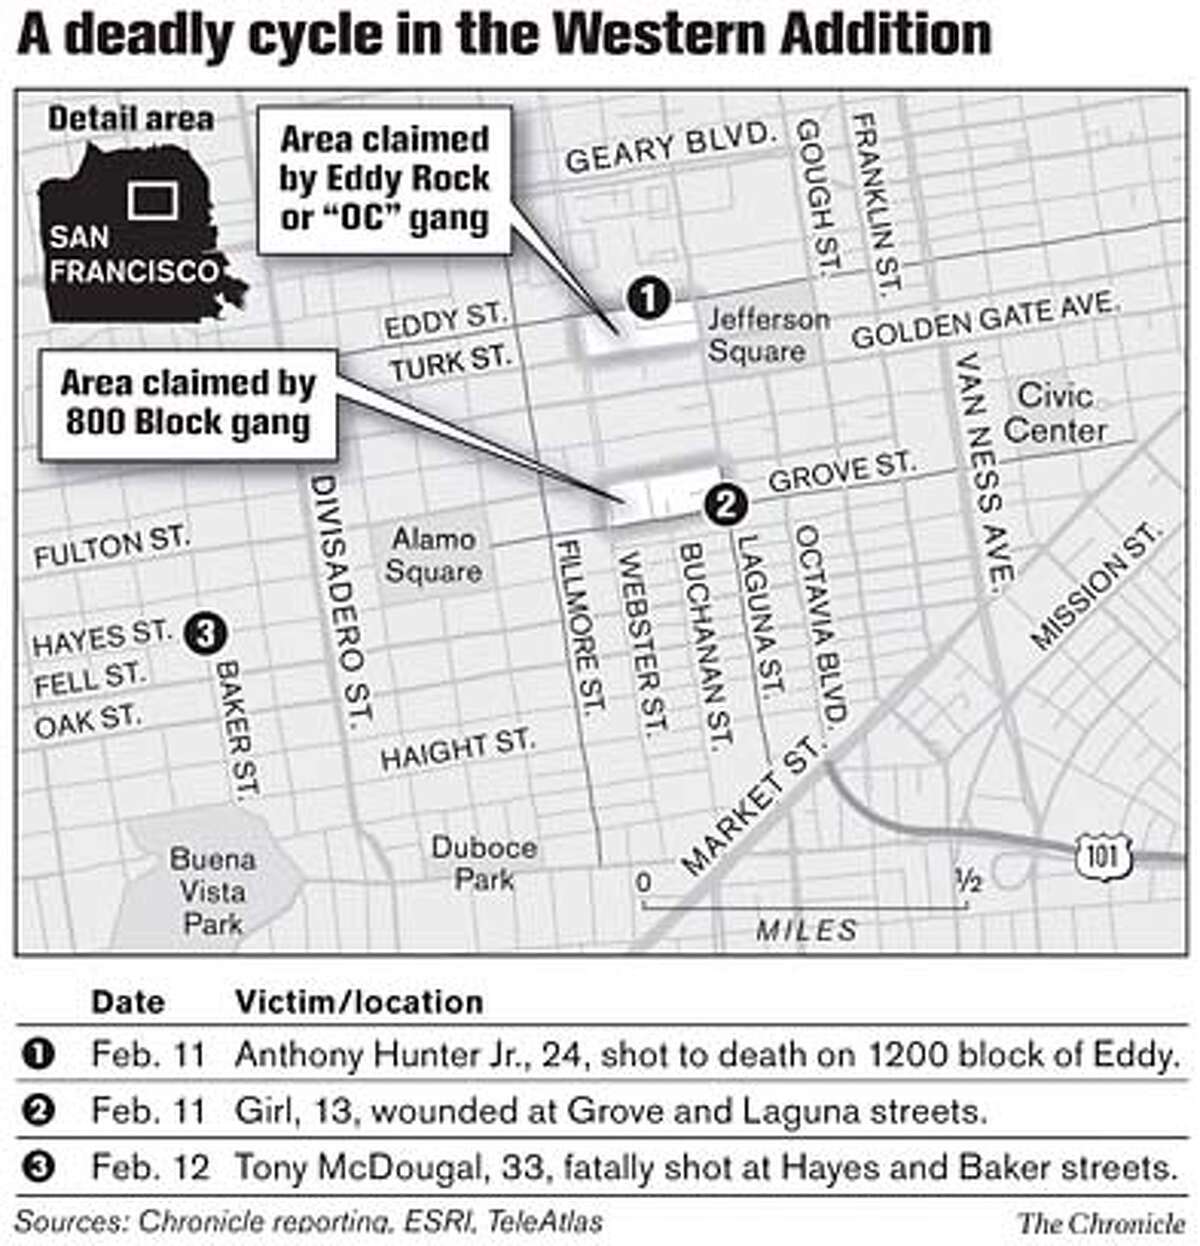 A deadly cycle in the Western Addition. Chronicle Graphic